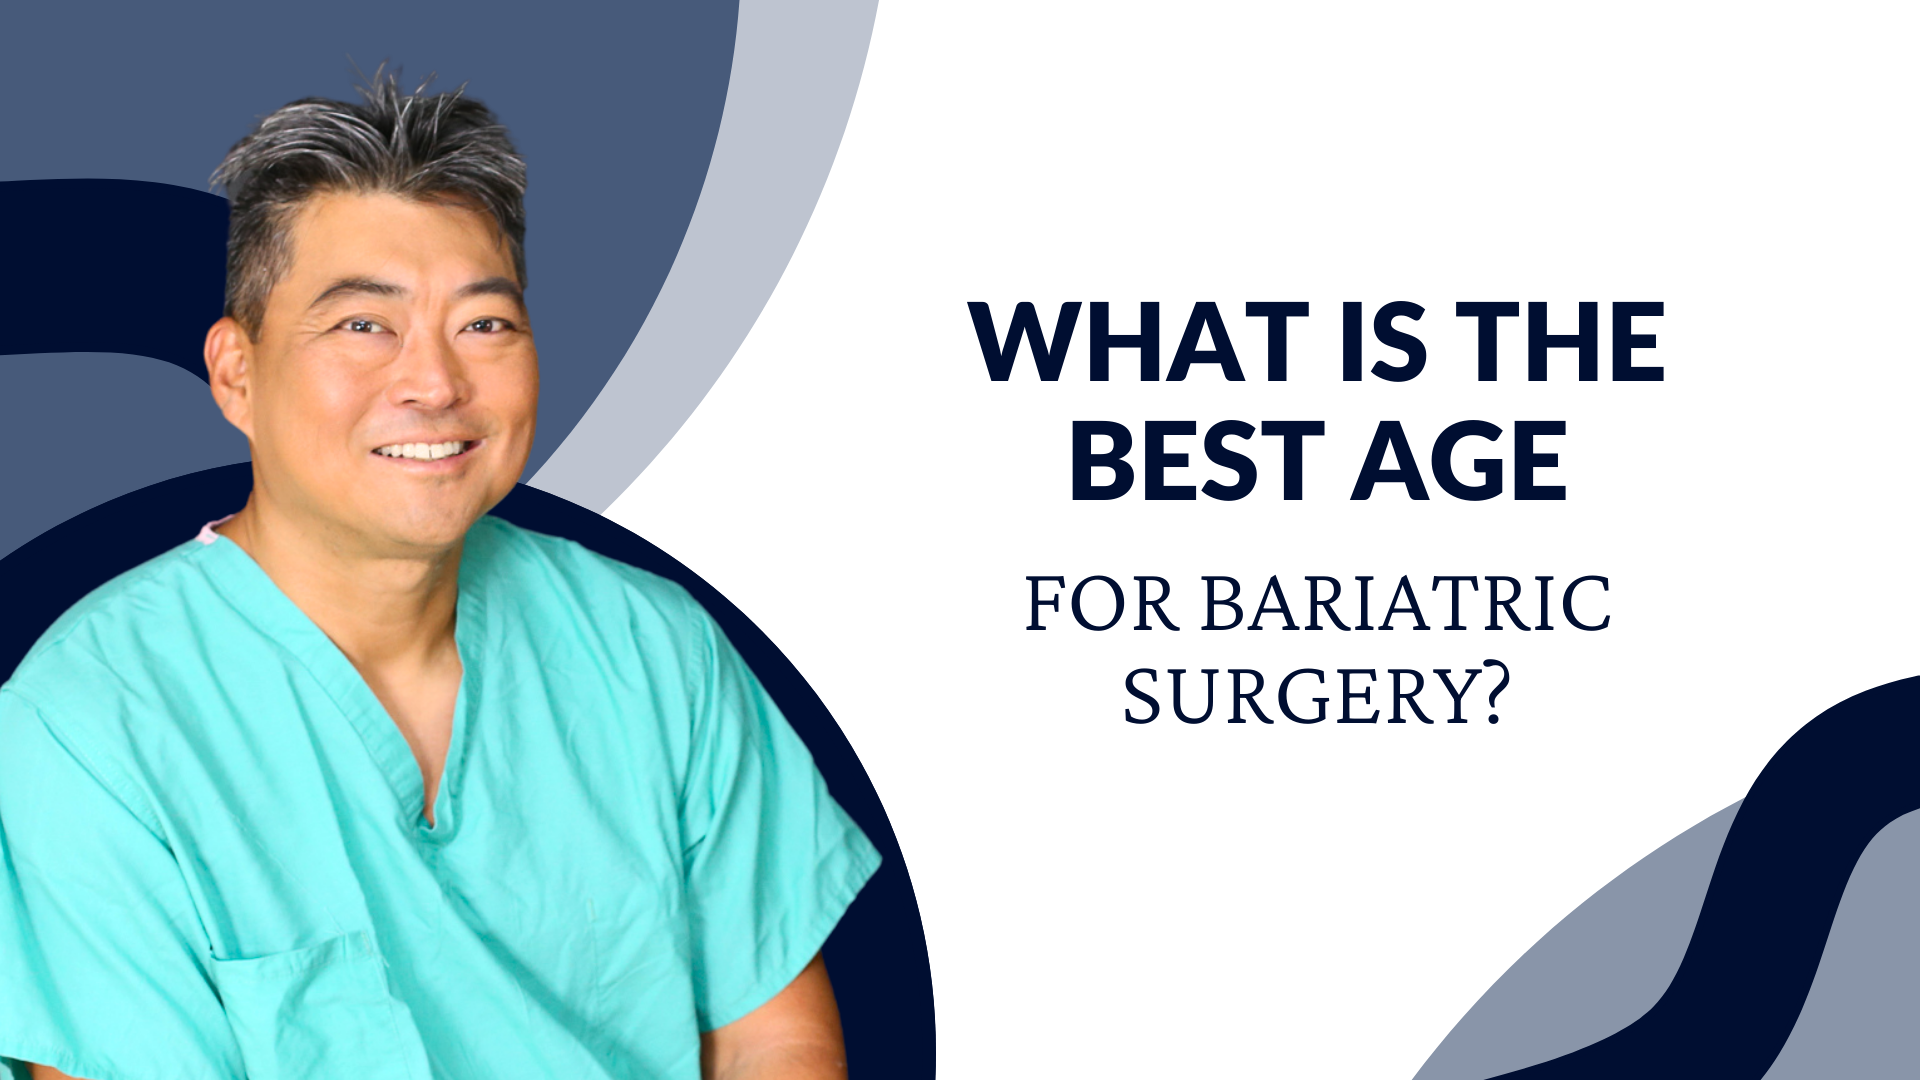 What Is the Best Age for Bariatric Surgery